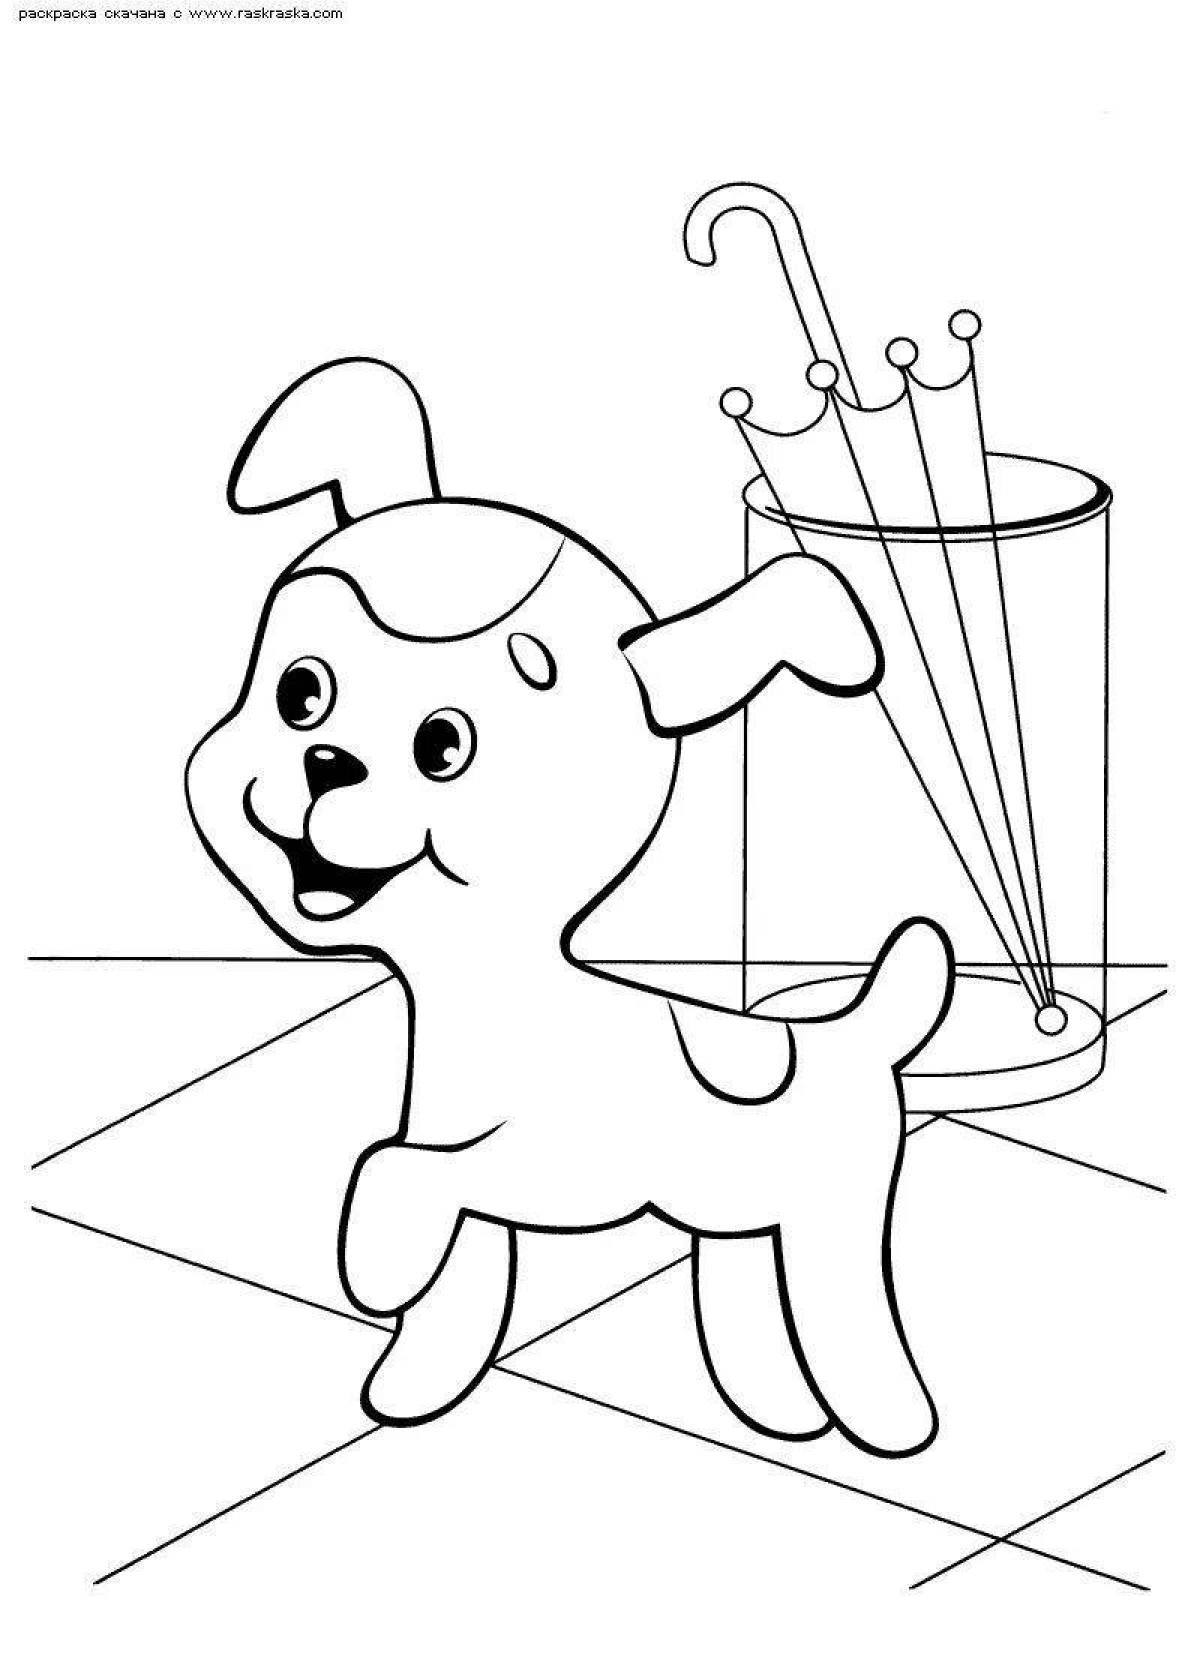 Adorable coloring pages kittens dogs for children 3 4 years old